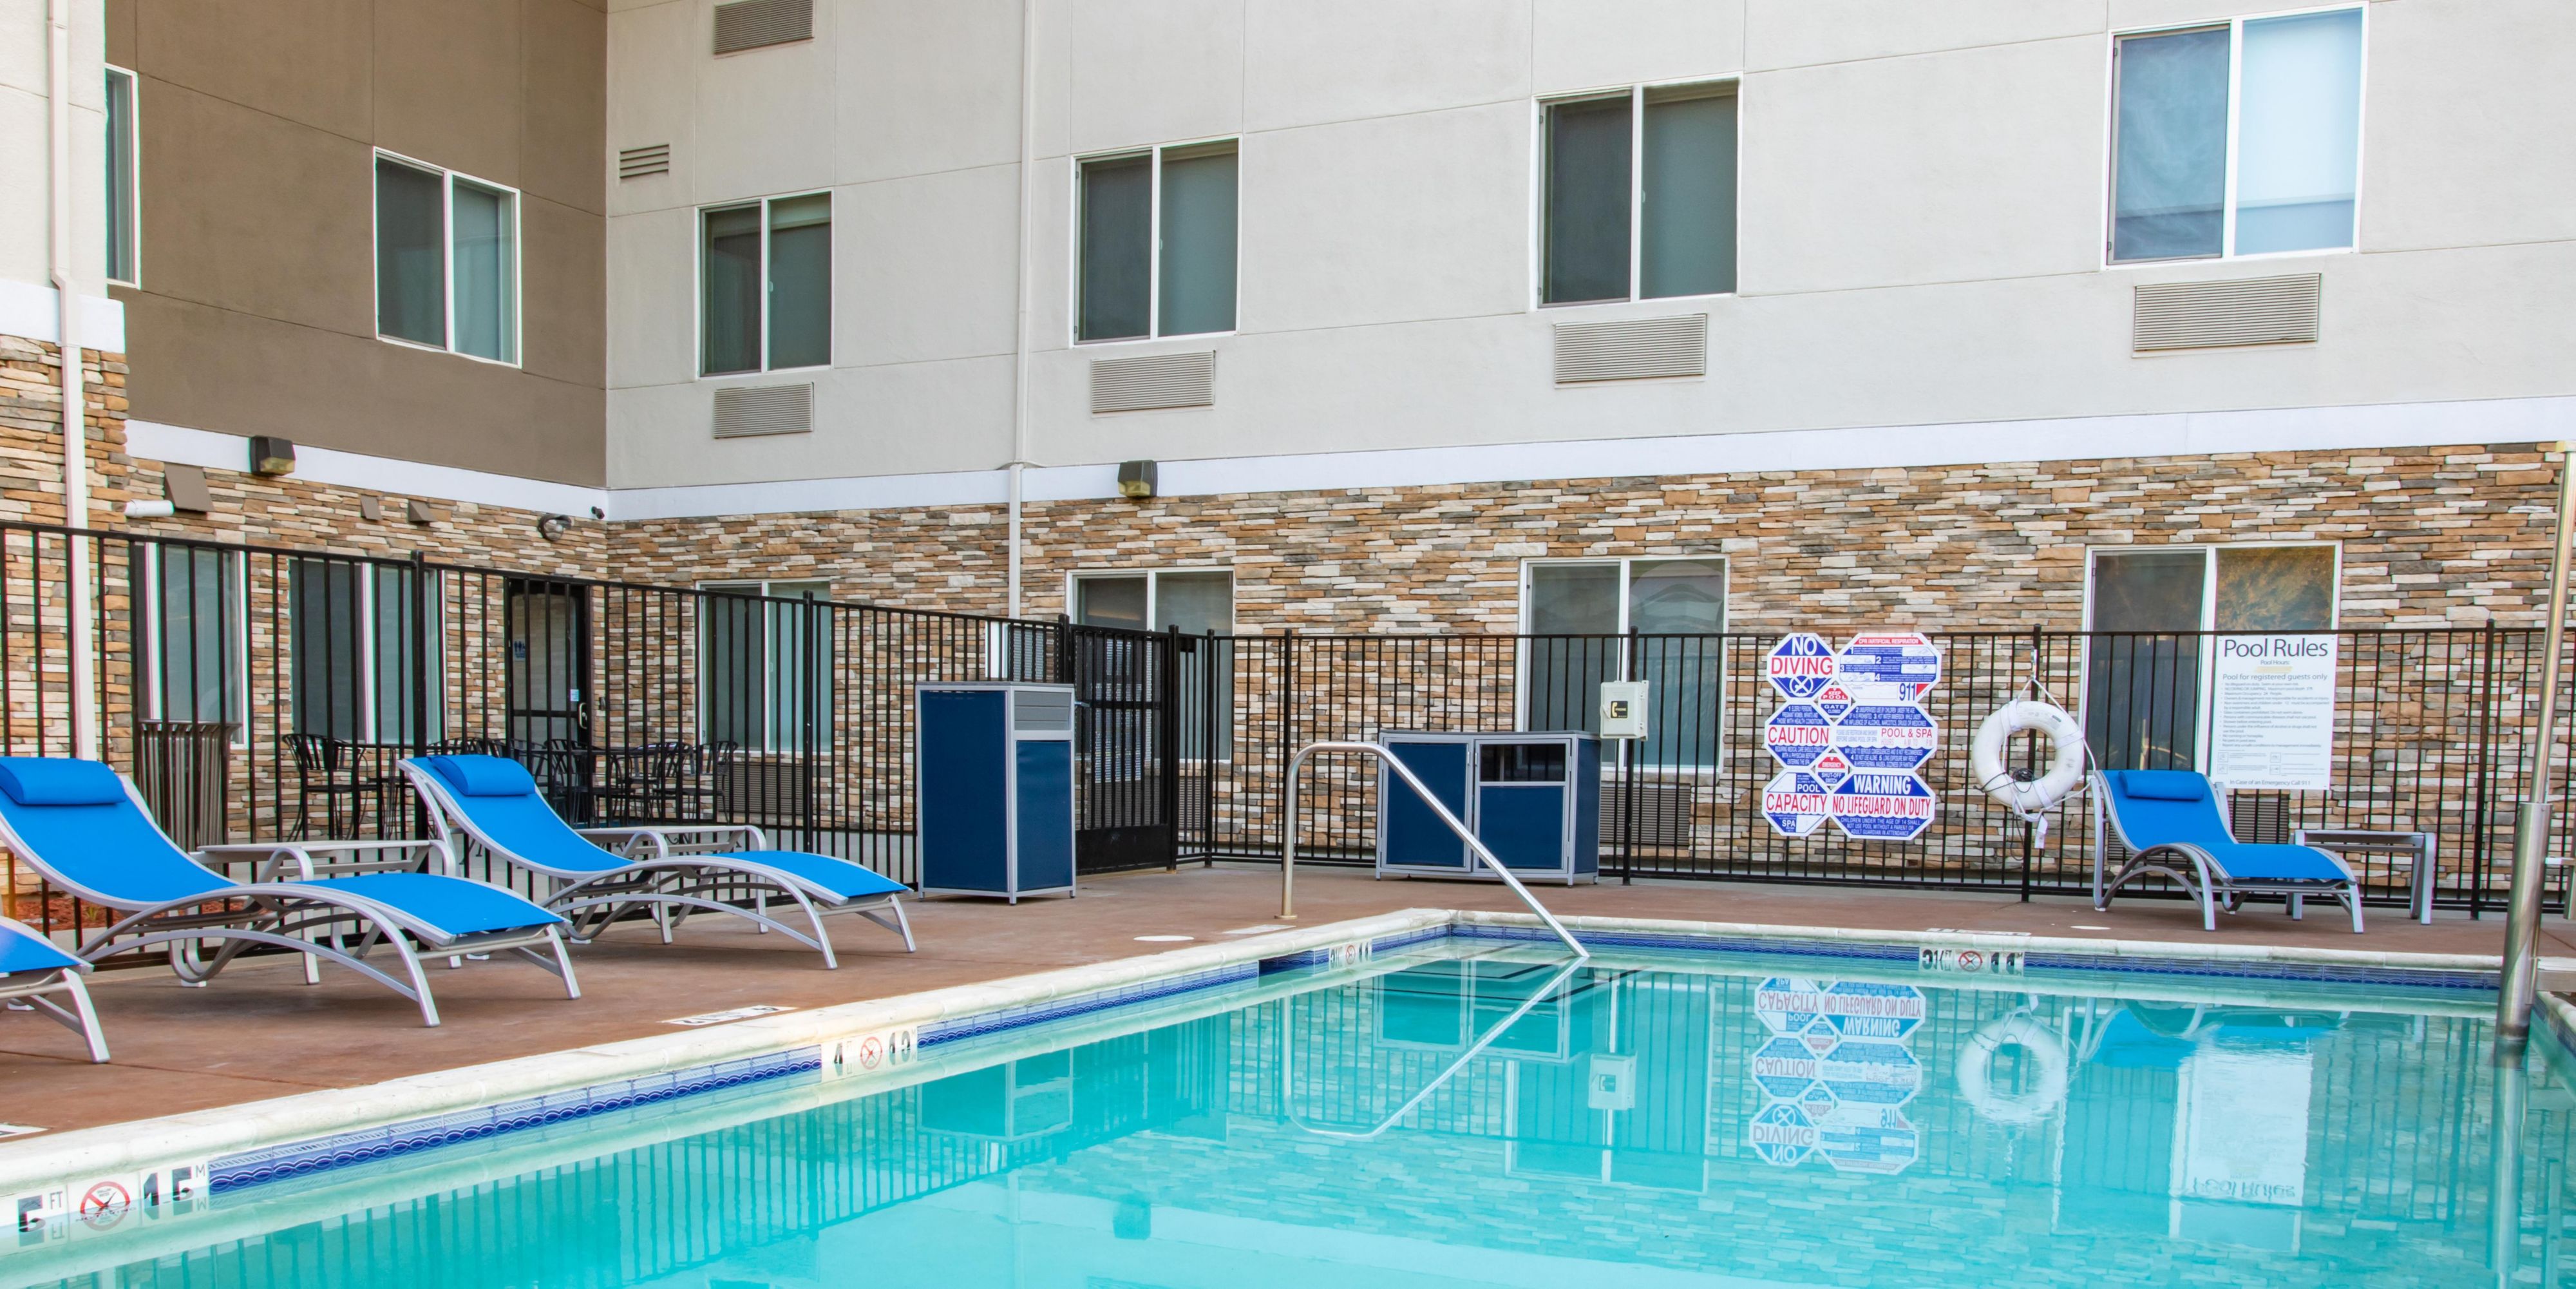 Come swim and relax in our outdoor pool. Hours: 8:00am to 10pm ( Daily).